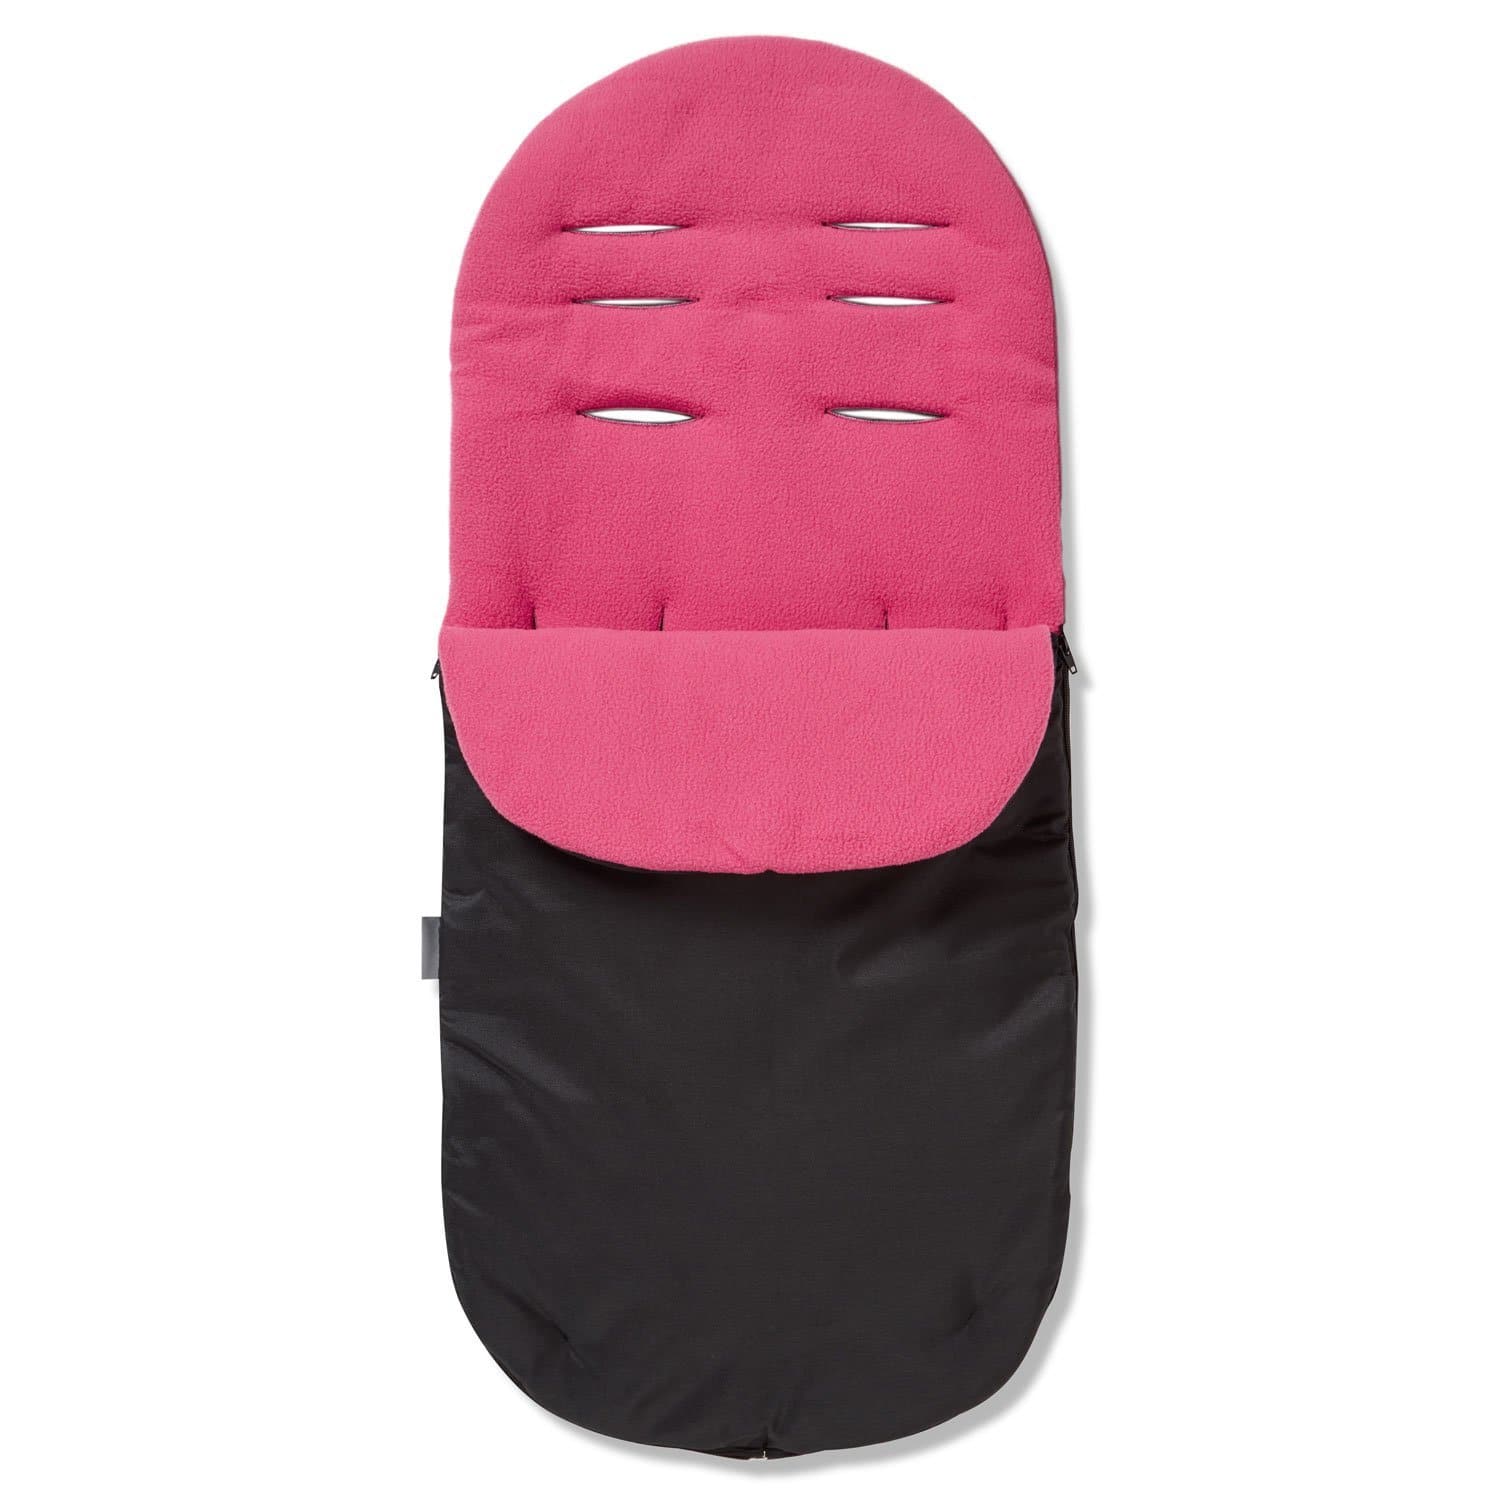 Footmuff / Cosy Toes Compatible with Brio - Dark Pink / Fits All Models | For Your Little One